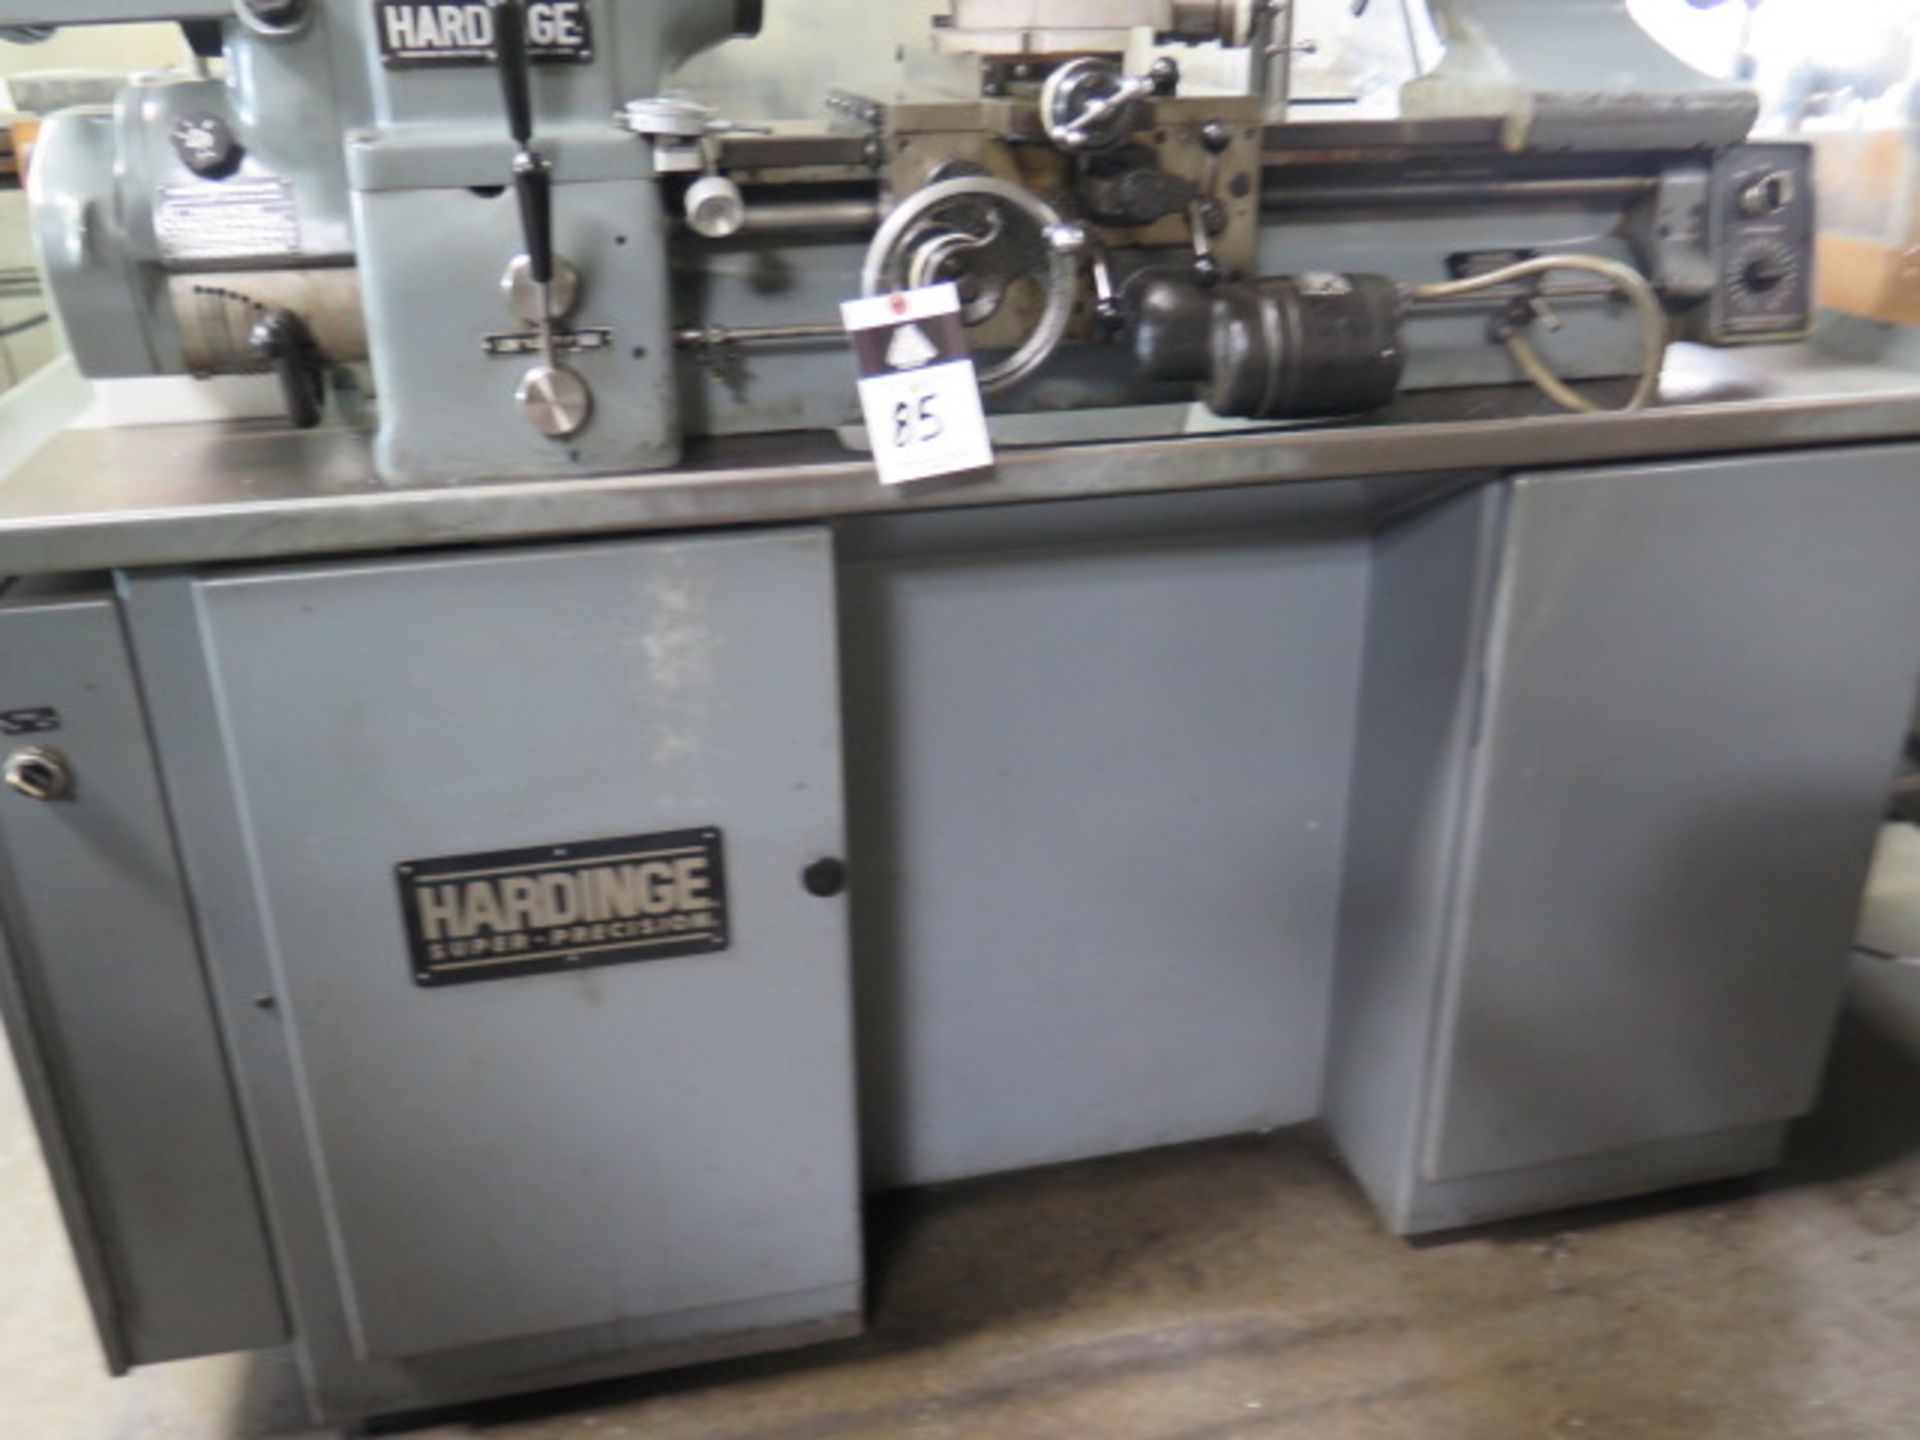 Hardinge HLV-H Wide Bed Tool Room Lathe s/n HLV-H-8708-T w/ 125-3000 RPM, Inch Threading, SOLD AS IS - Image 4 of 18